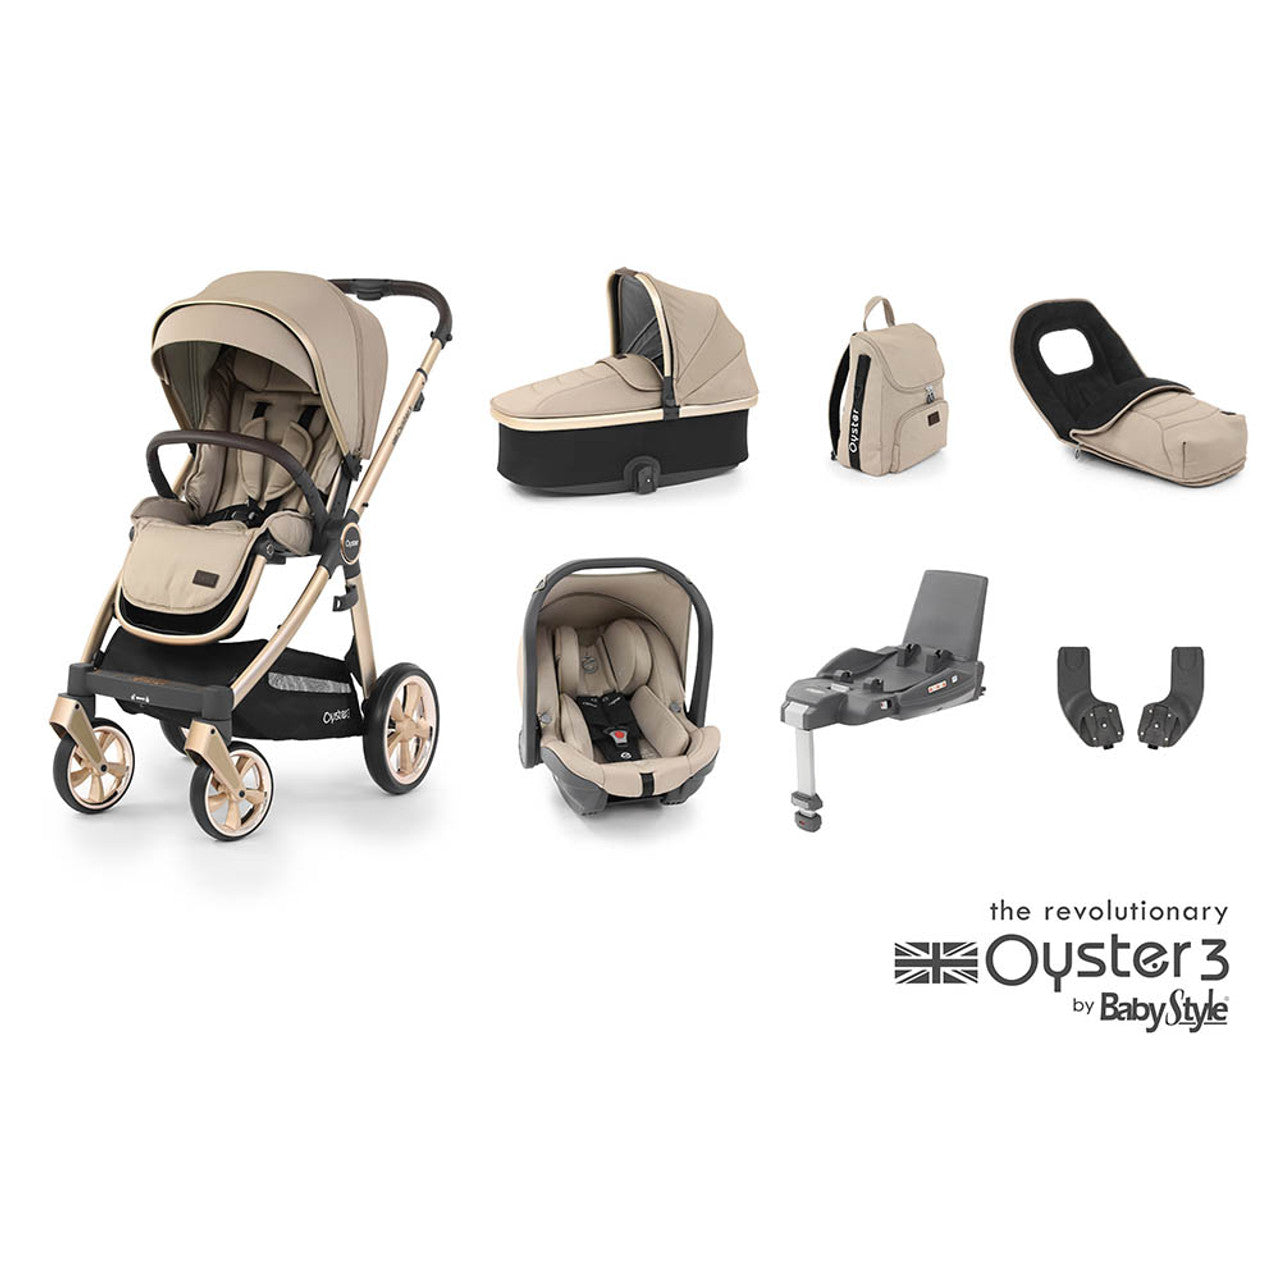 Oyster 3 Bundle including i-size carseat and isofix base – Champagne